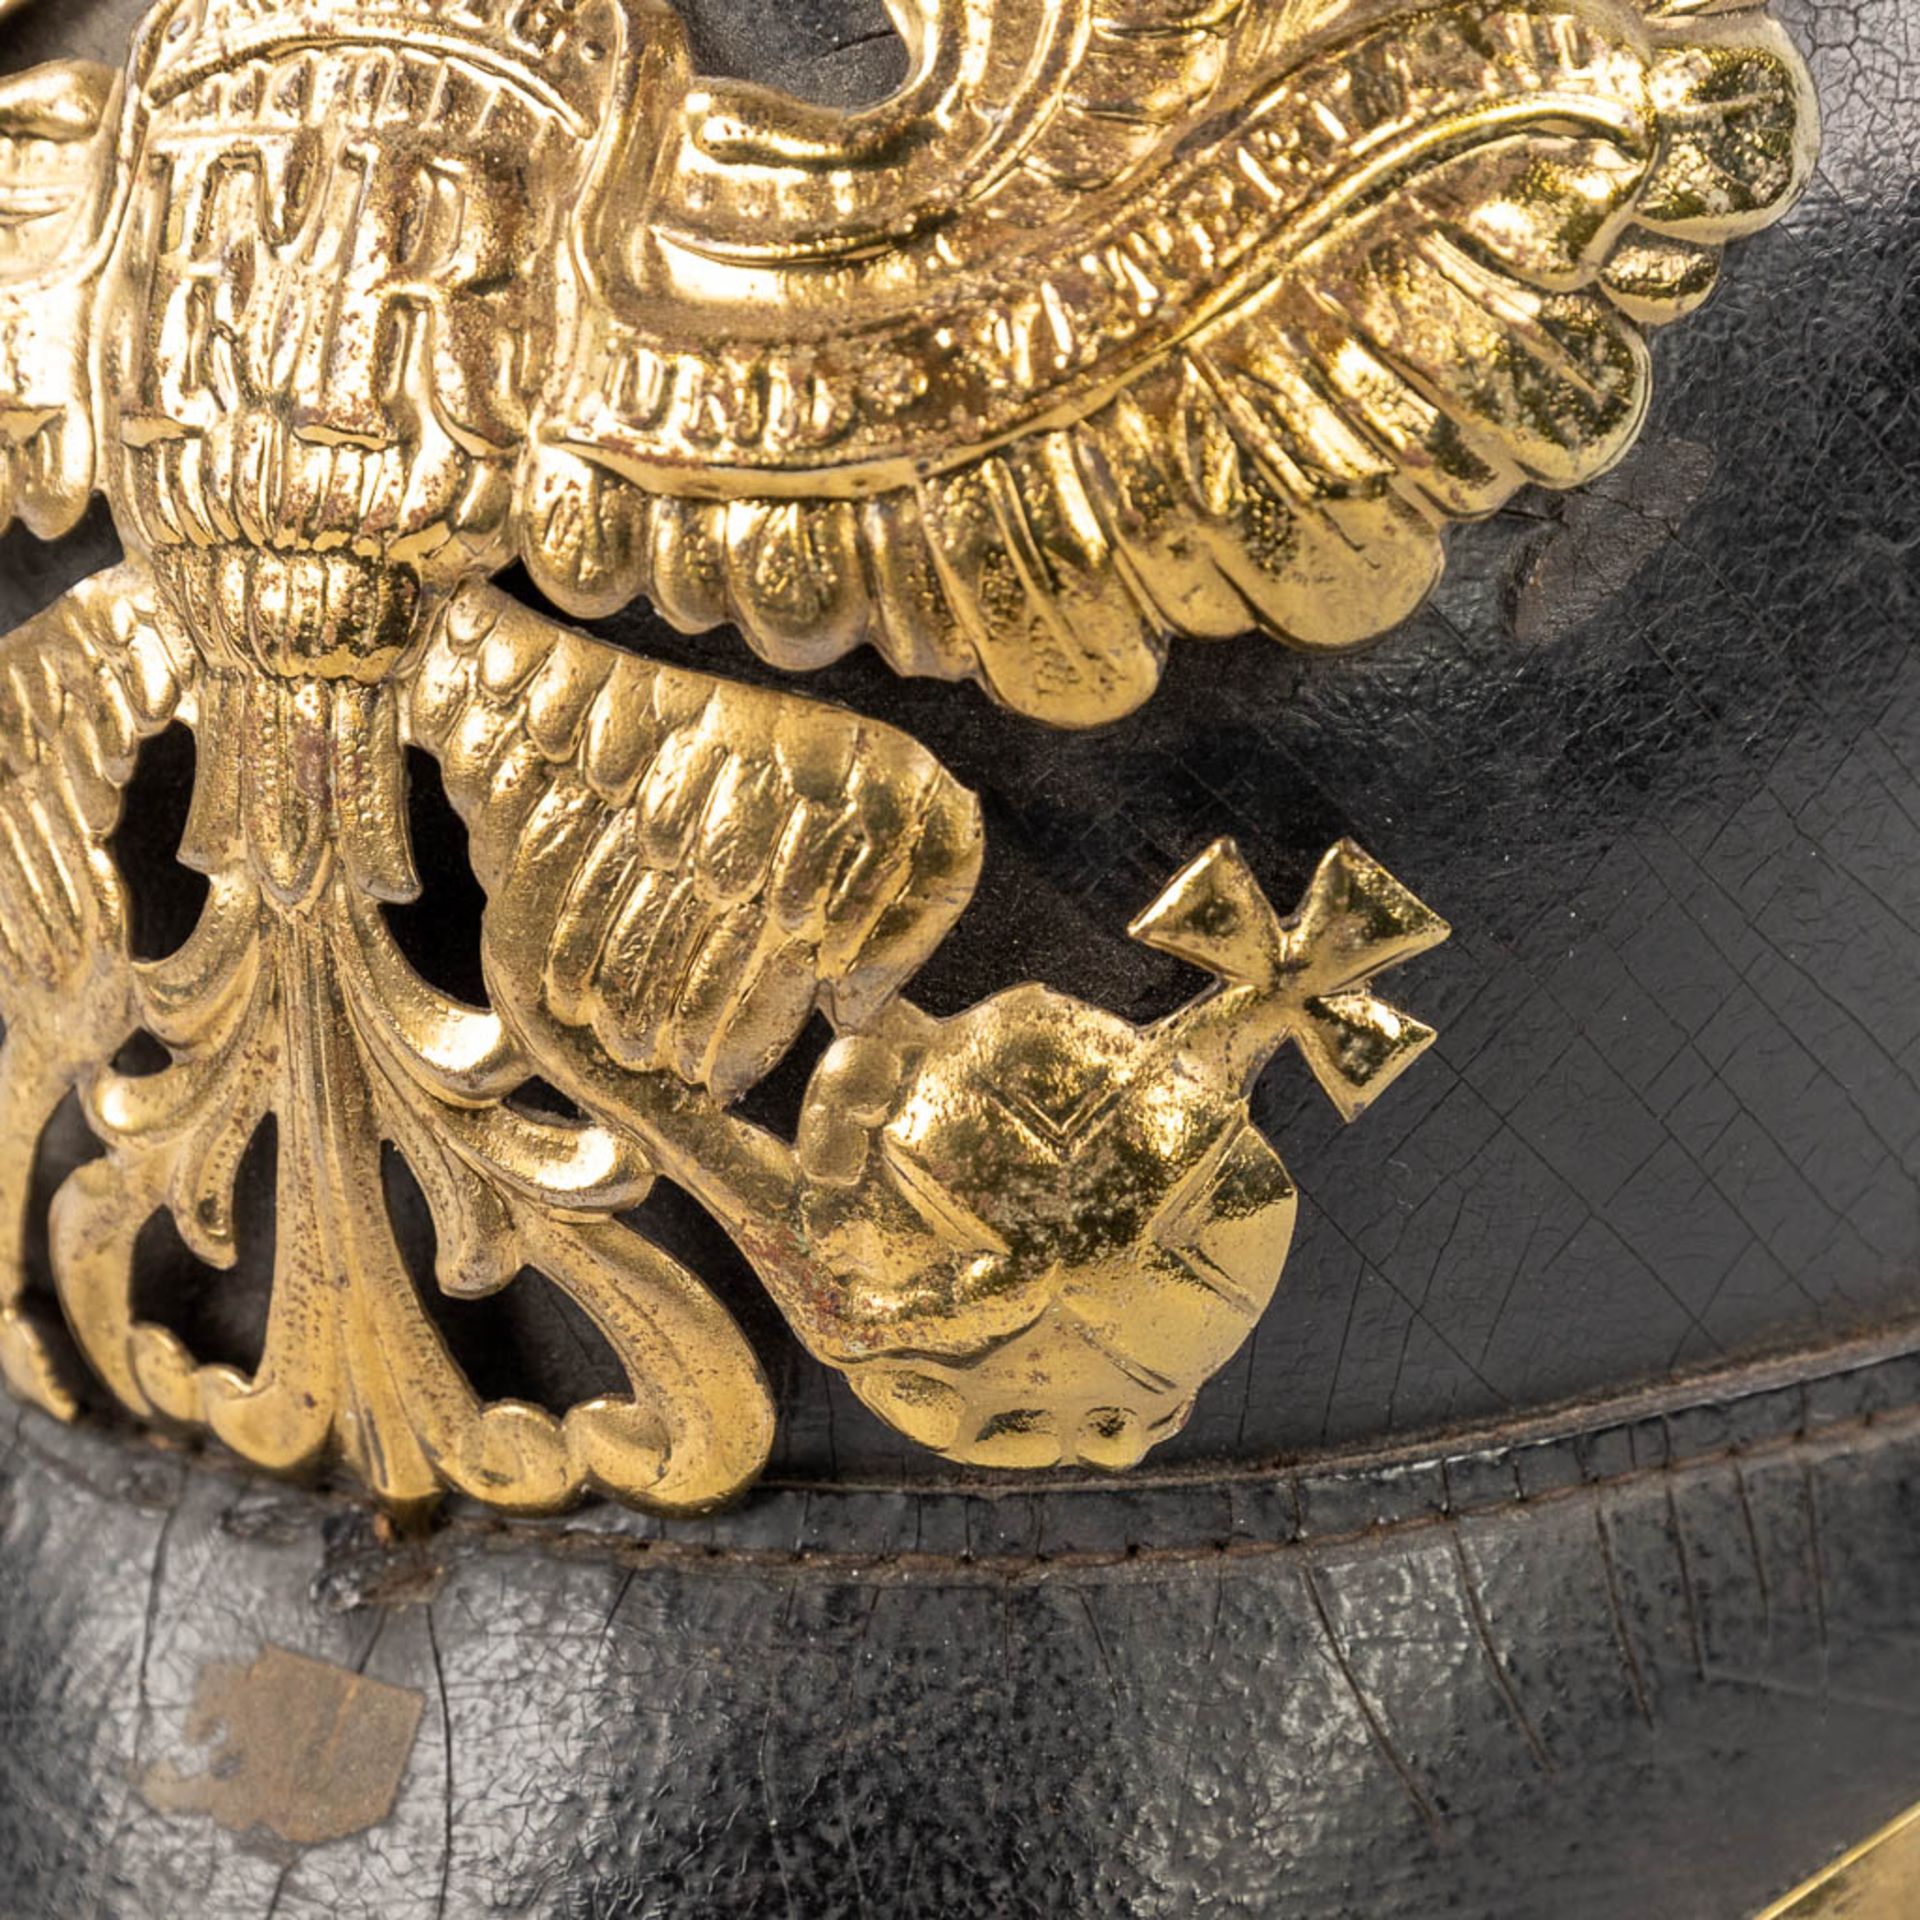 An antique German 'Pickelhaube' decorated with an eagle. Dating 1914-1918. (L:25 x W:18 x H:21 cm) - Bild 15 aus 17